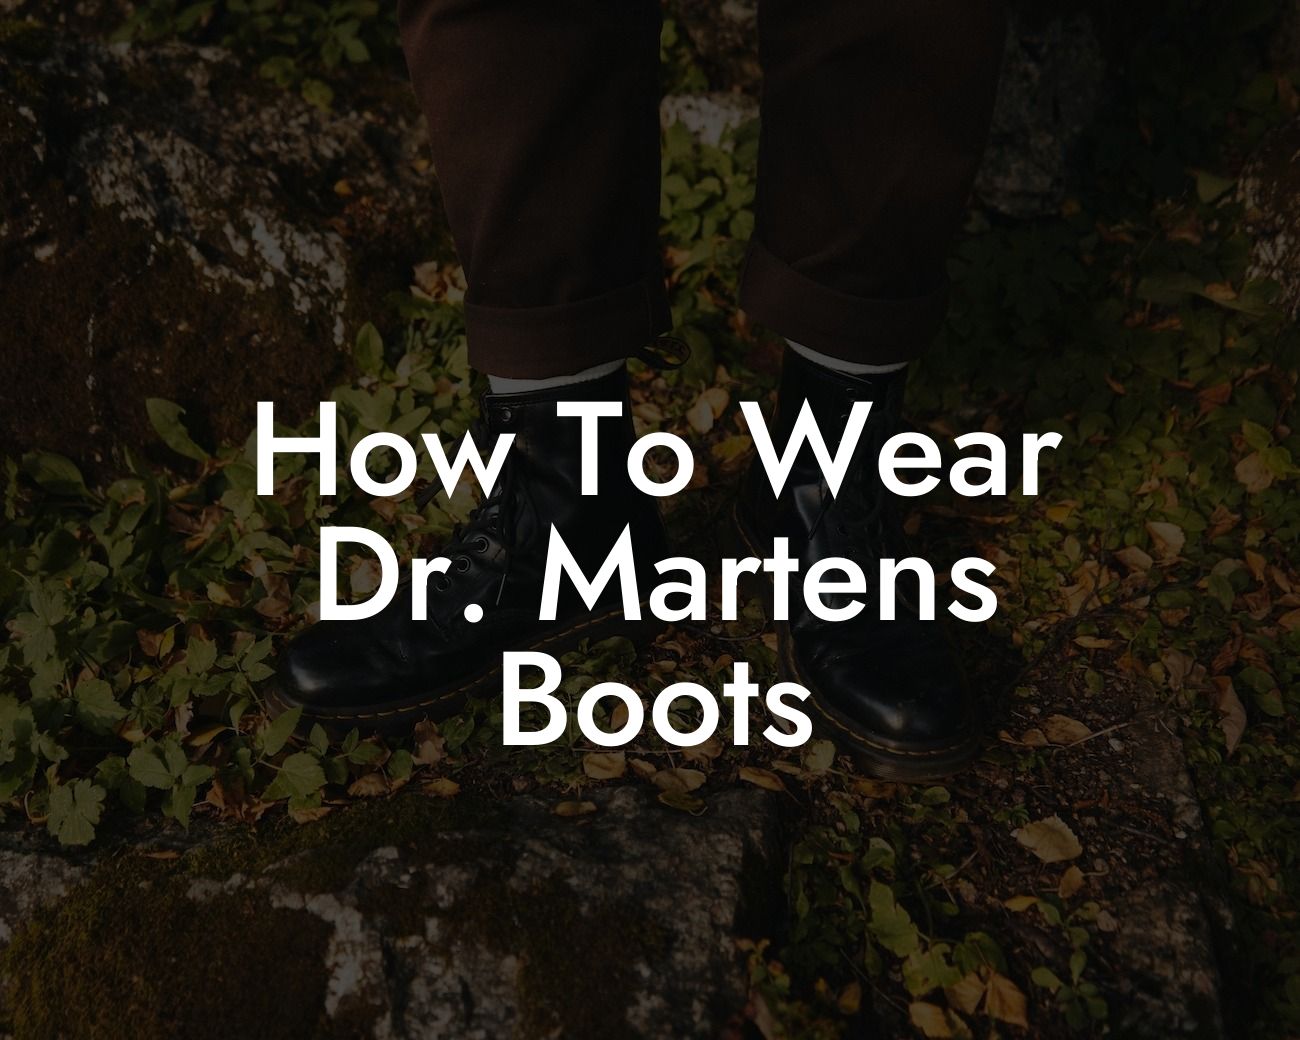 How To Wear Dr. Martens Boots